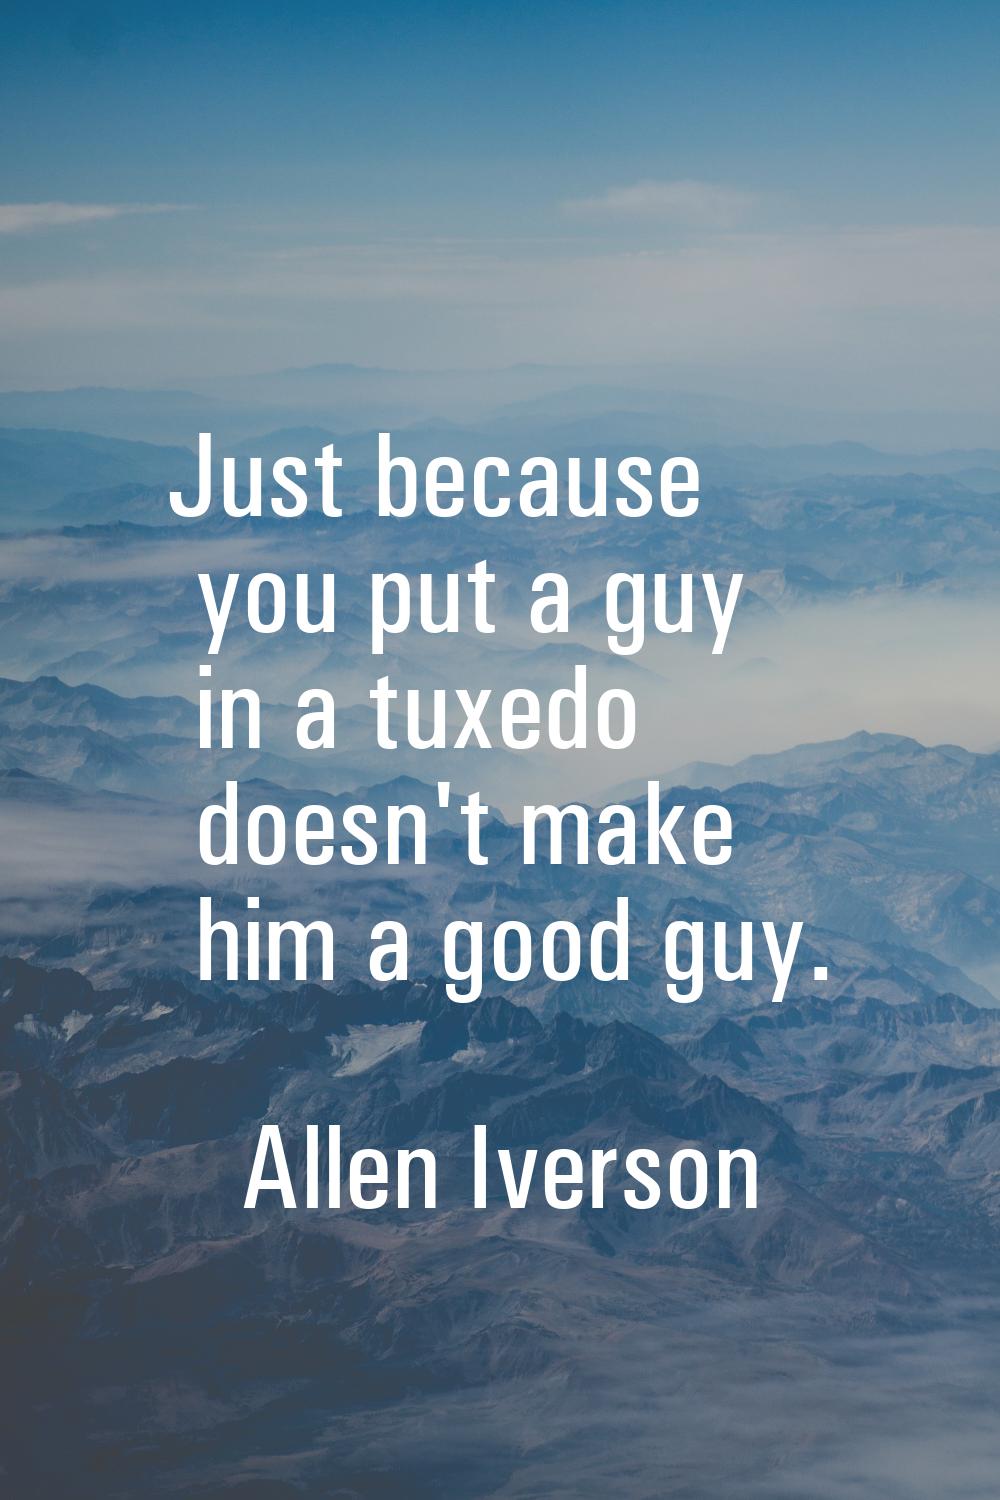 Just because you put a guy in a tuxedo doesn't make him a good guy.